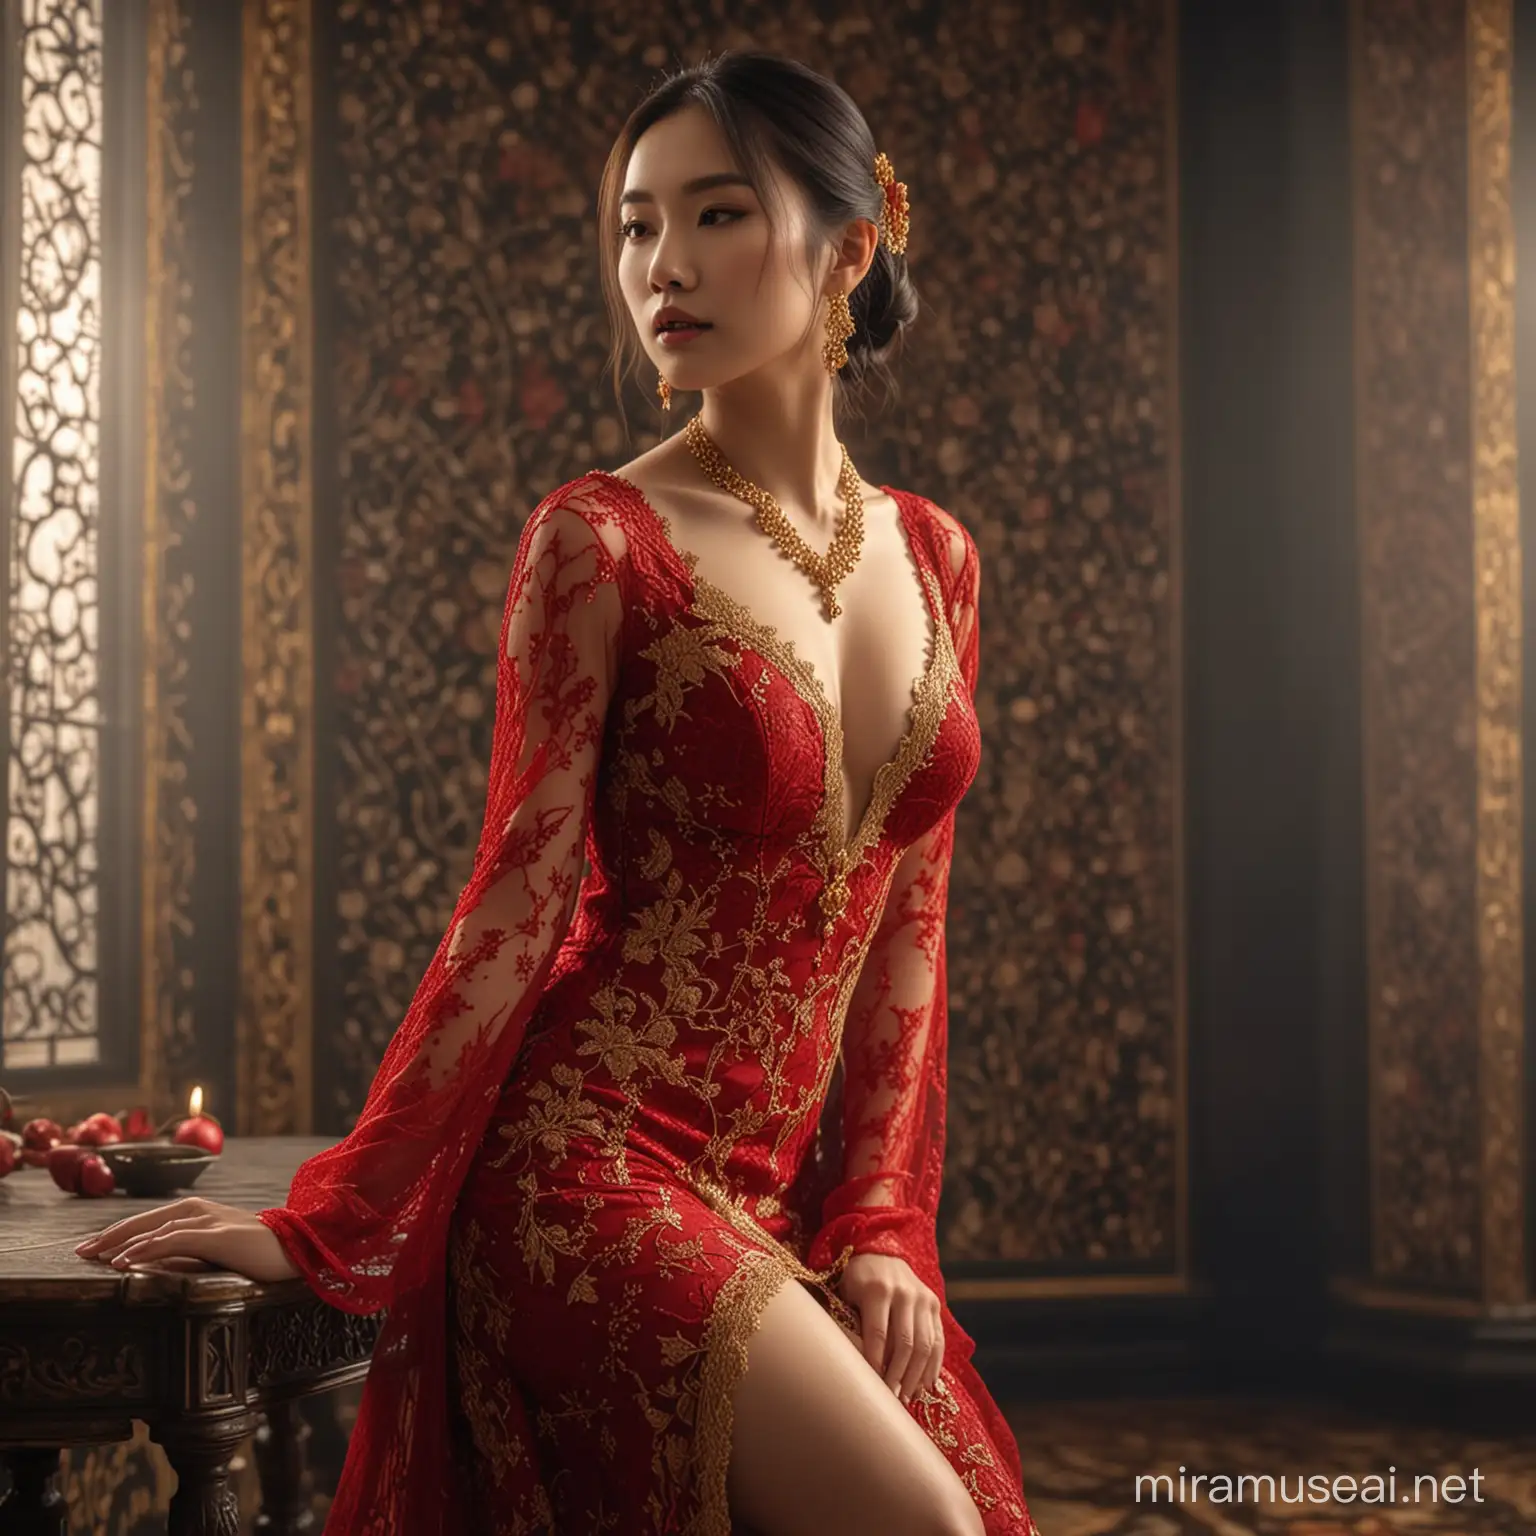 Asian woman with a delicate face and ideal figure, full body, large breasts, side view, dressed in an elegant red and gold lace dress, adorned with necklace and earrings, poses with grace, personifying an aesthetically enhanced beauty, legs exposed, capturing gothic tones with a divine aura,8k,hdr.